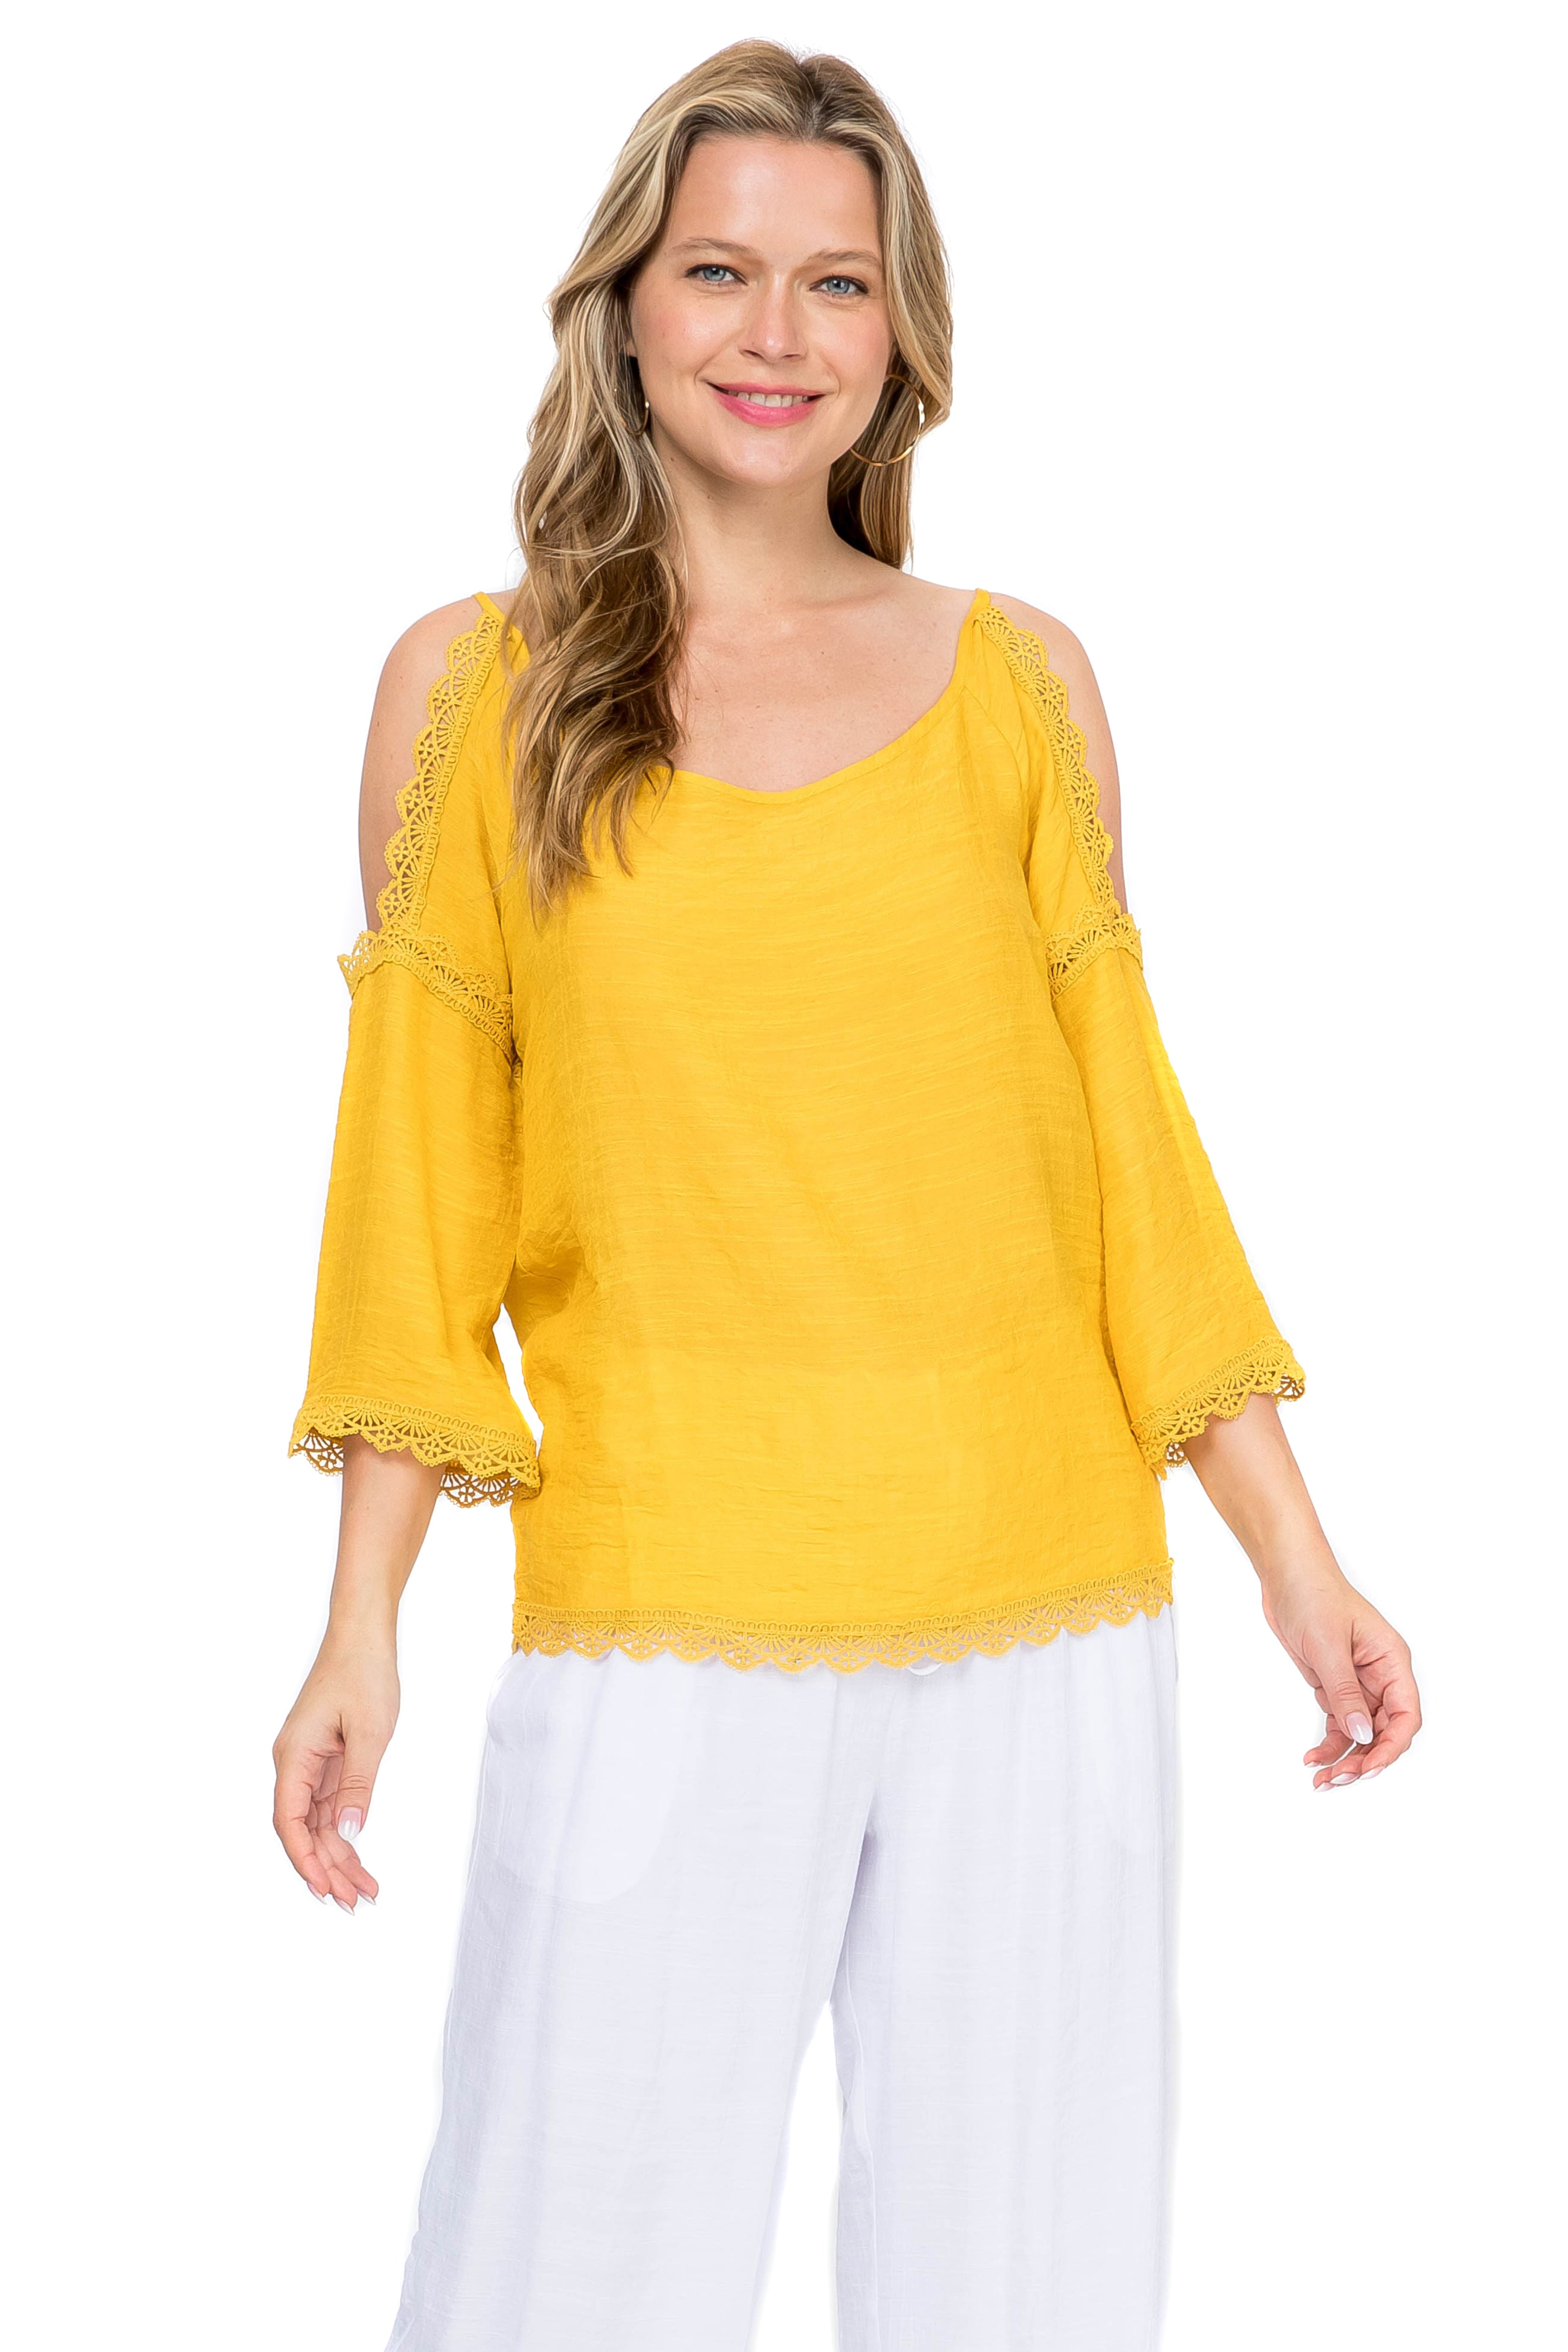 4 Sleeve Tunic Top - Mojito Collection - Vacation Clothing, Women's Clothing, Women's Resort Wear, Women's Top